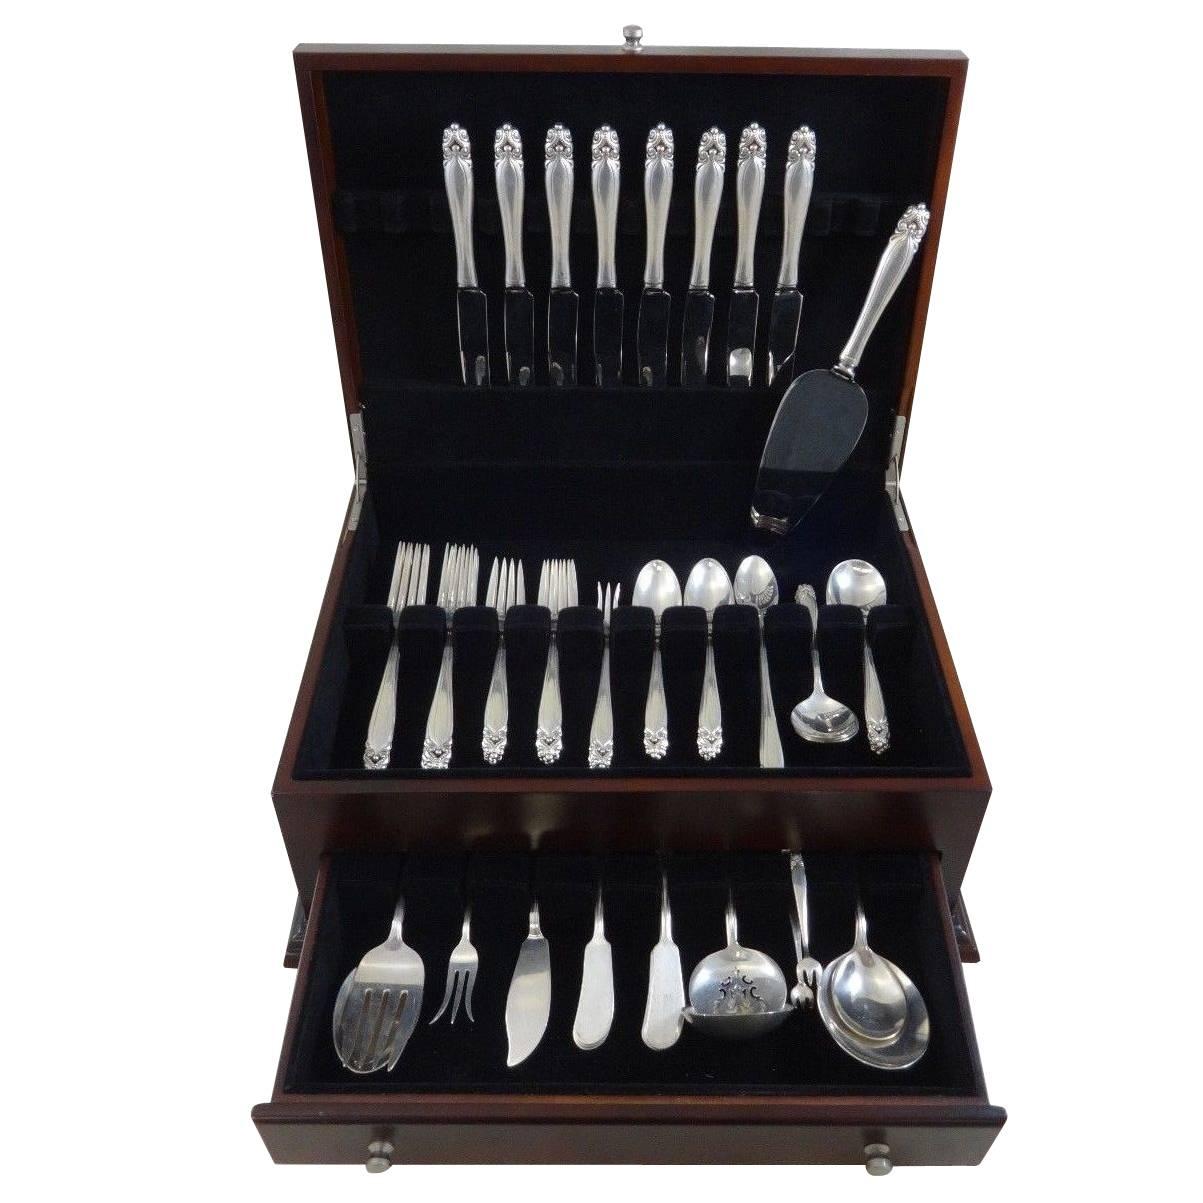 King Christian by Wallace circa 1940 sterling silver flatware set of 74 pieces. This set includes:

Eight knives, 9